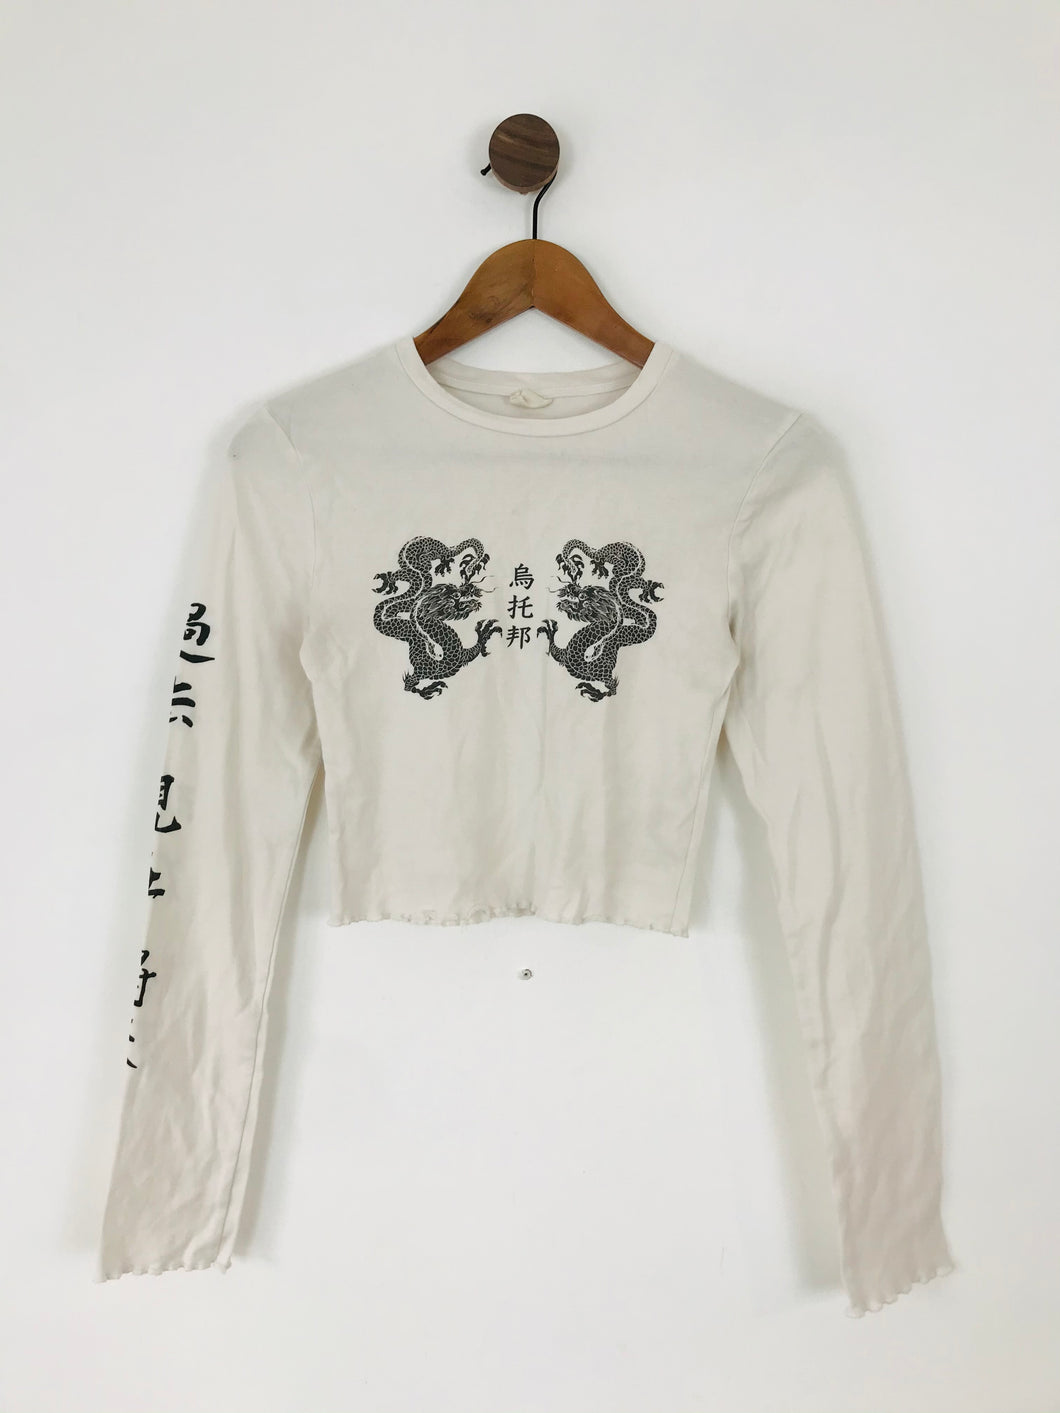 Urban Outfitters Women’s Cropped Dragon Print Top | XS UK6-8 | White